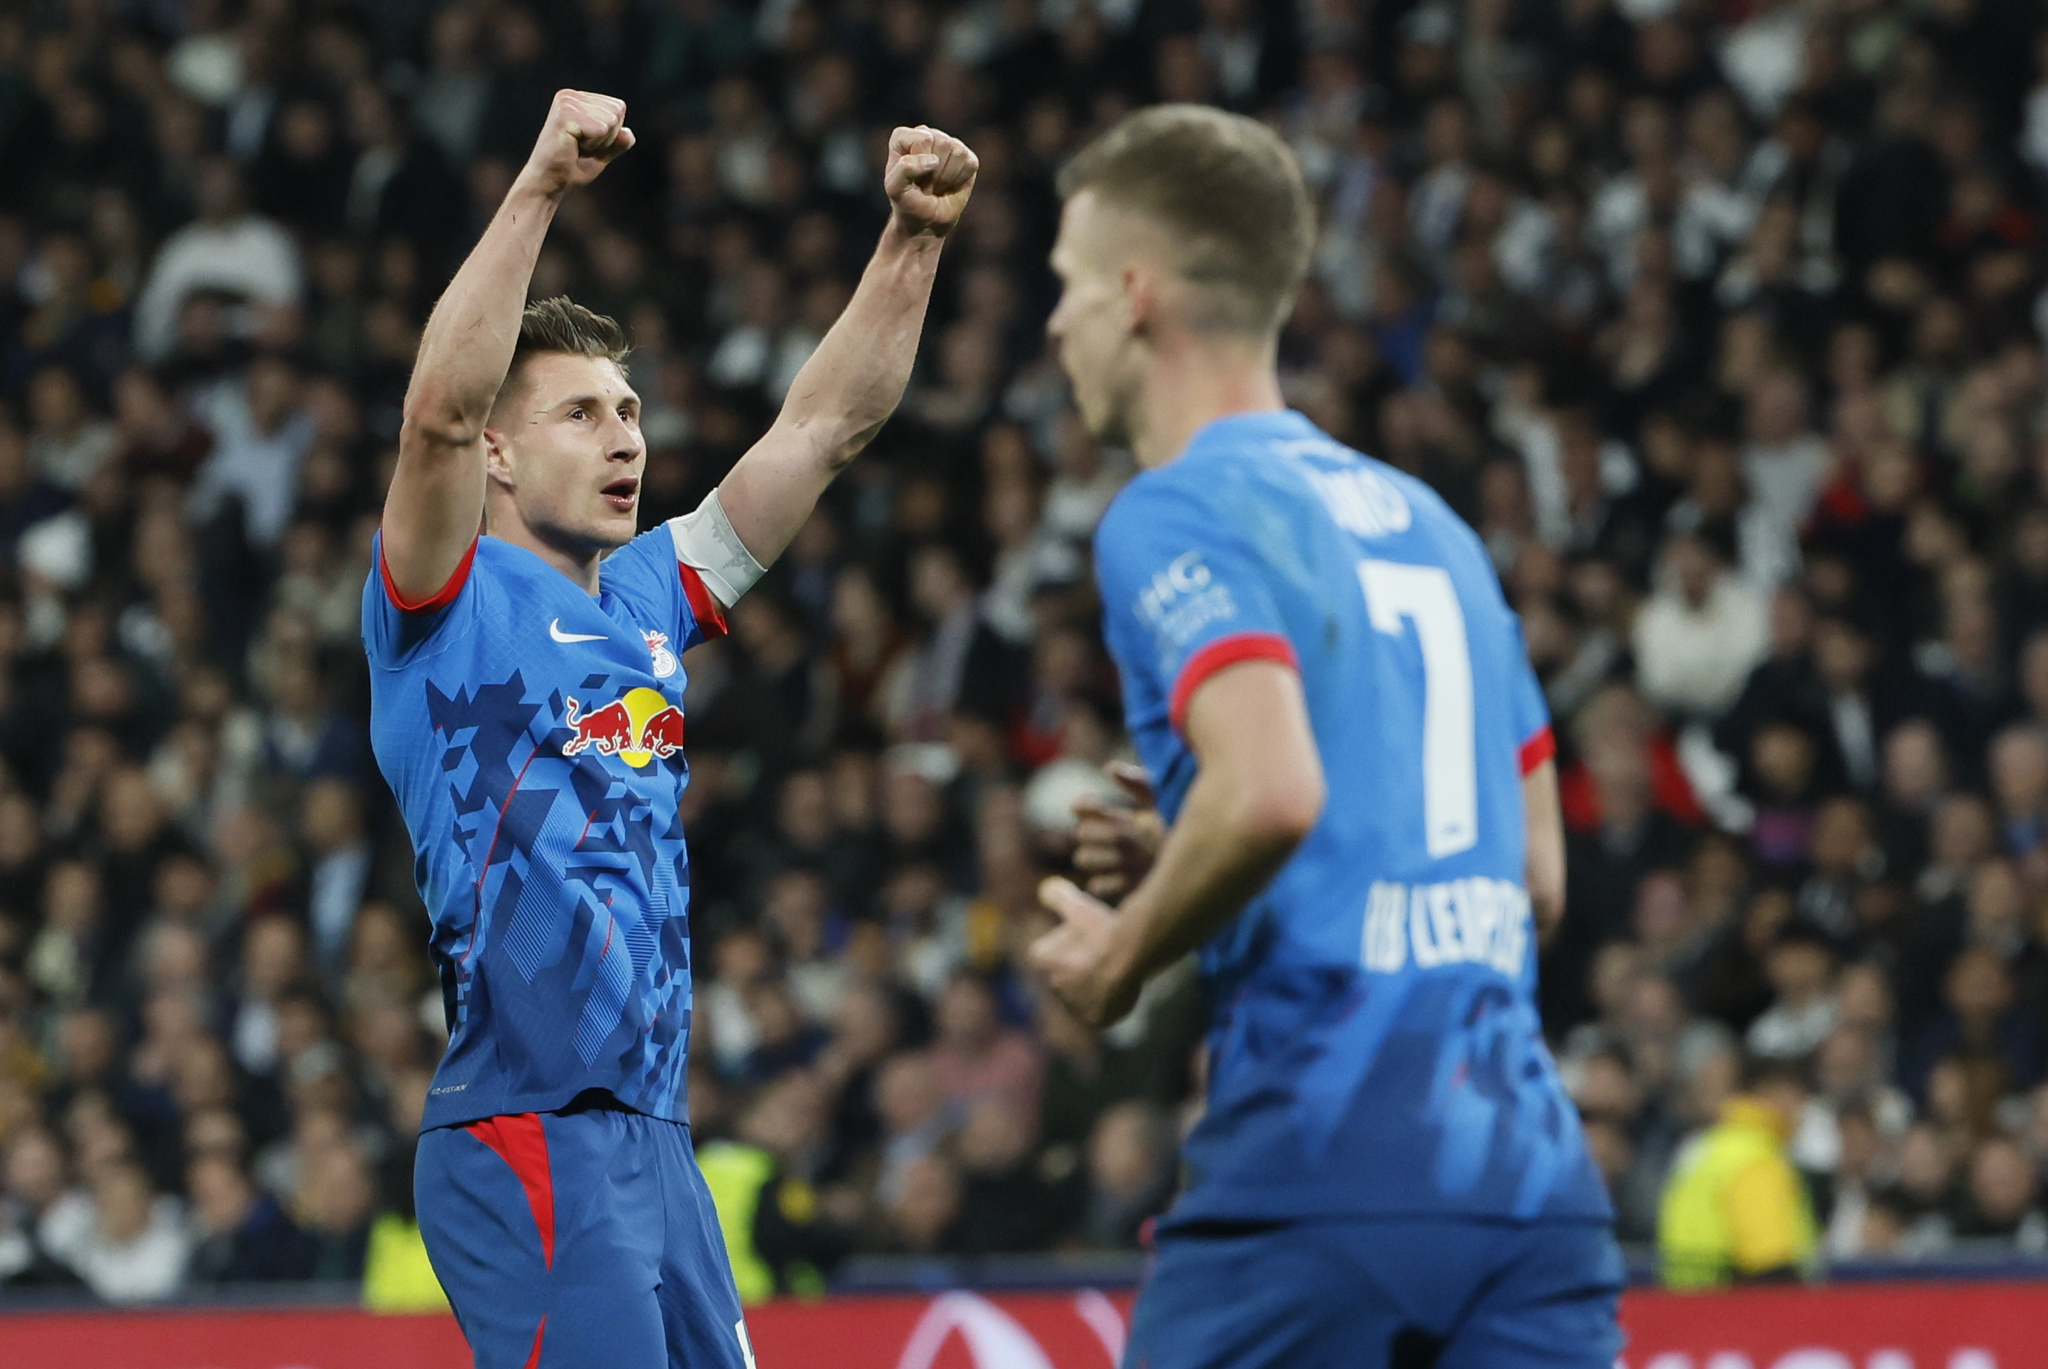 However Willi Orban scored minutes later to keep RB Leipzig's hopes alive